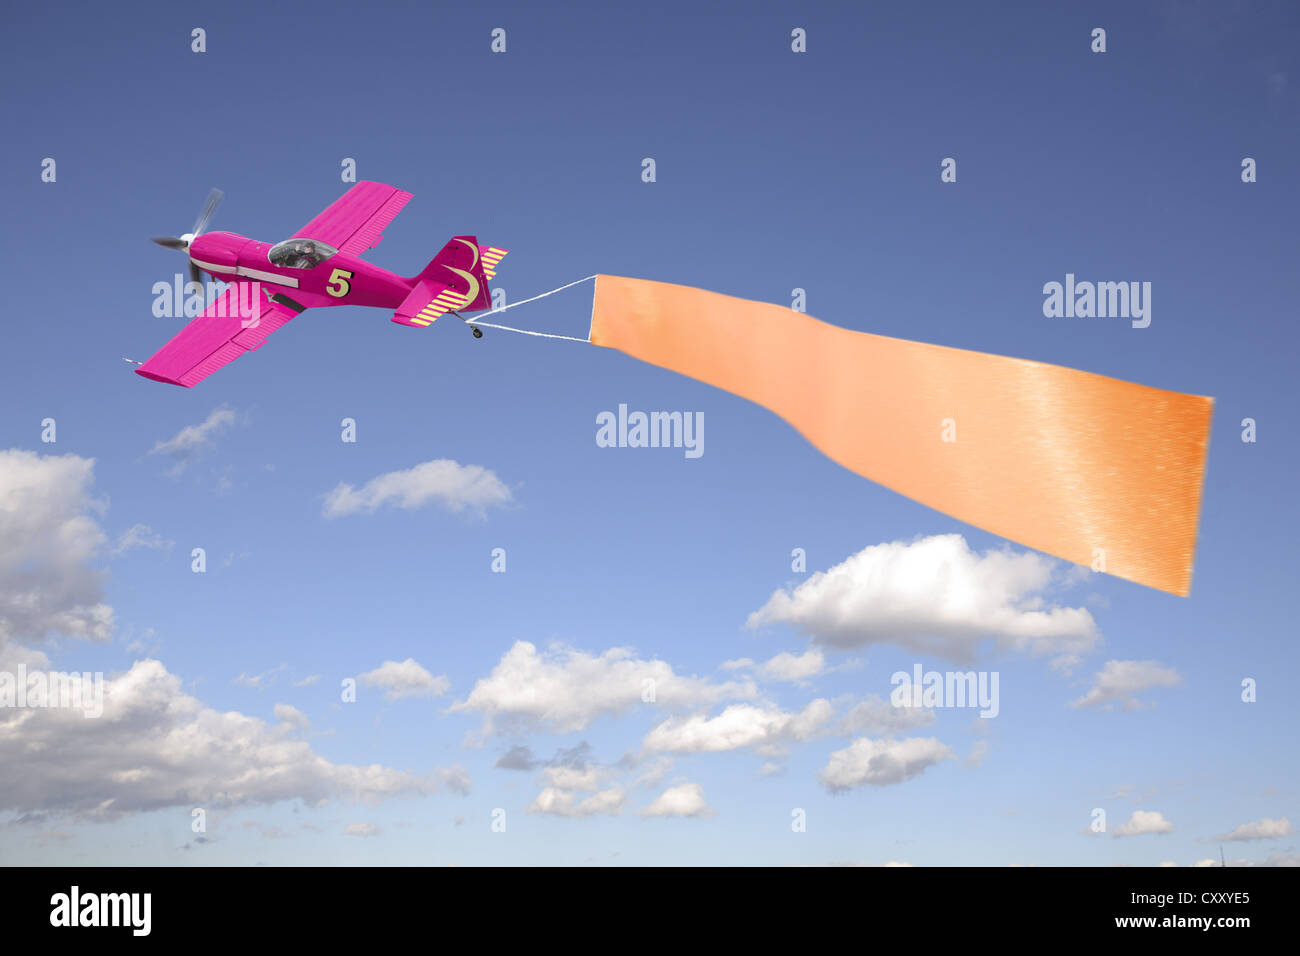 Plane pulling a blank banner in the sky, illustration Stock Photo